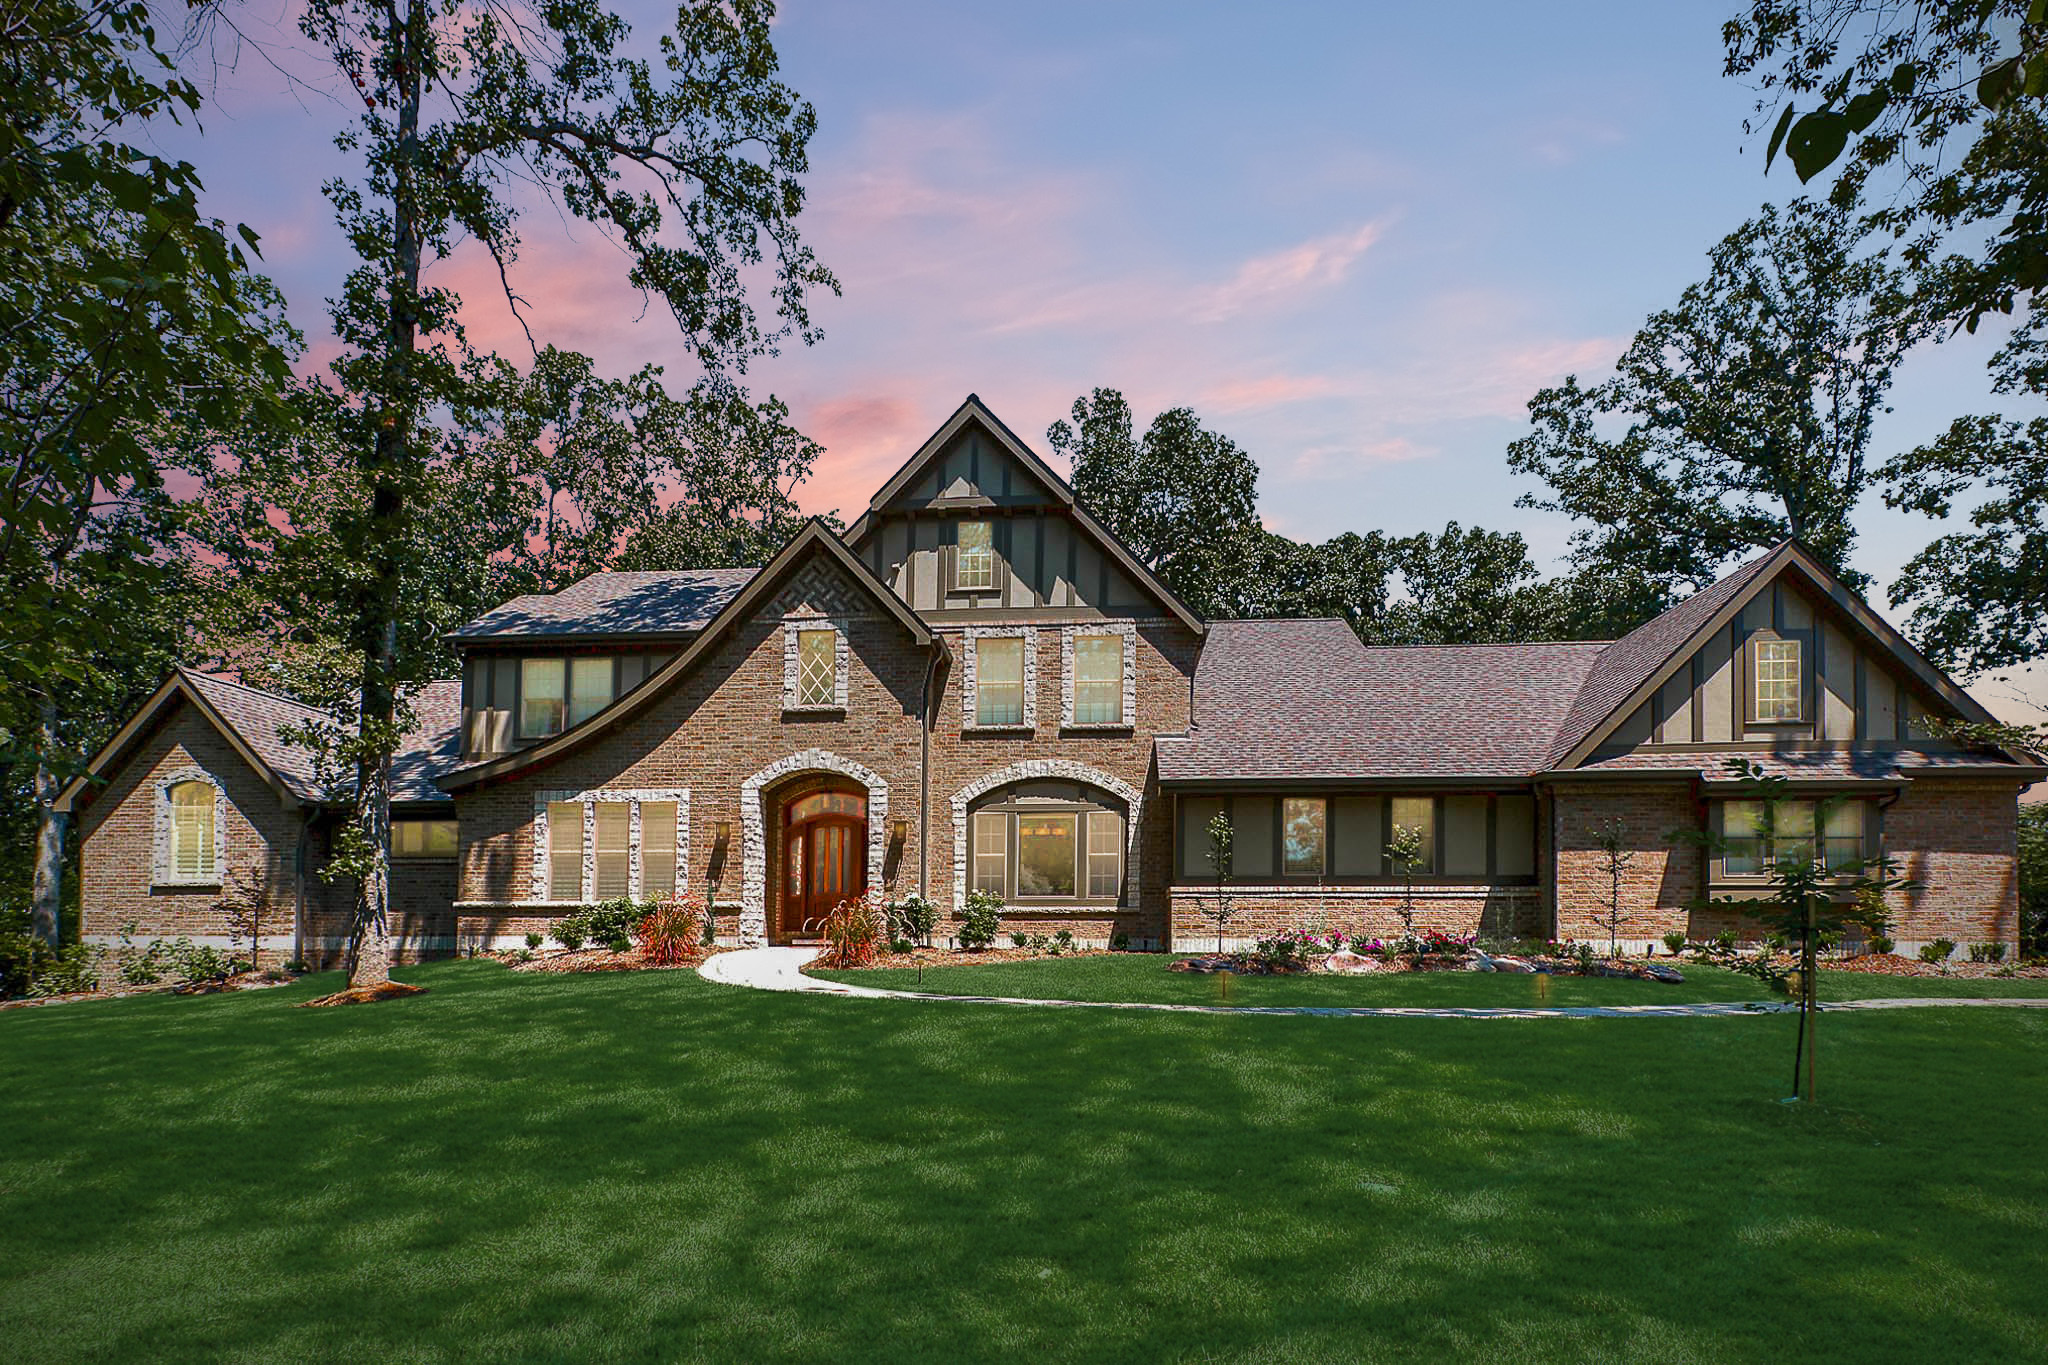 Frontenac Forest Custom Home Built by Hibbs Luxury Homes